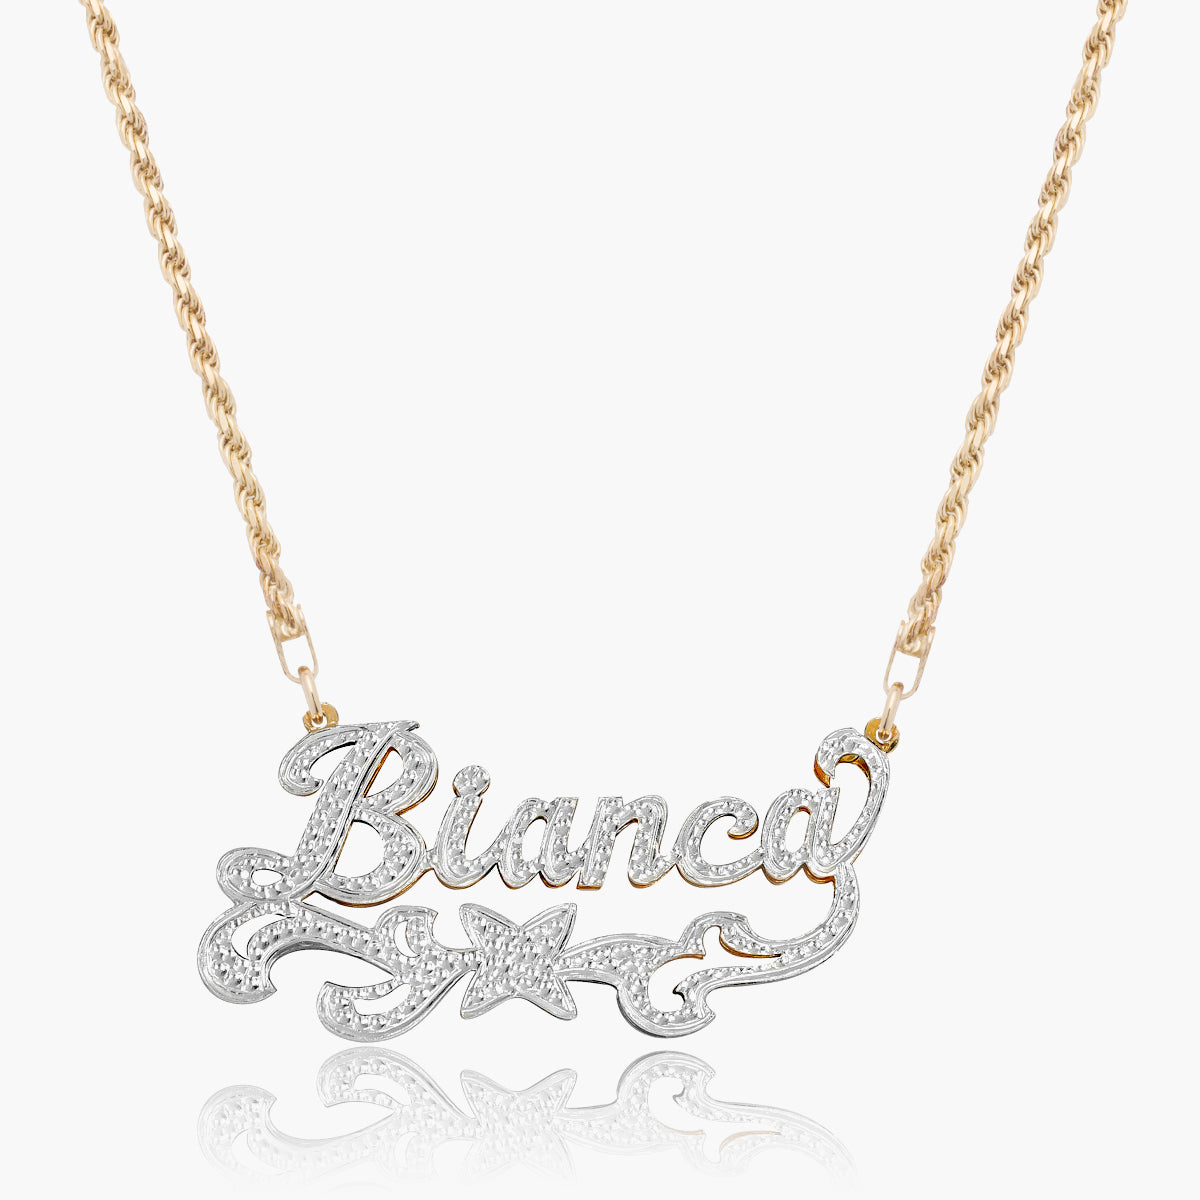 Personalized Double Plated XO Chain Necklace With Heart Design Custom Name  Strings For Women Two Tone Mothers Day Jewelry Gift 230822 From Jiao06,  $32.96 | DHgate.Com